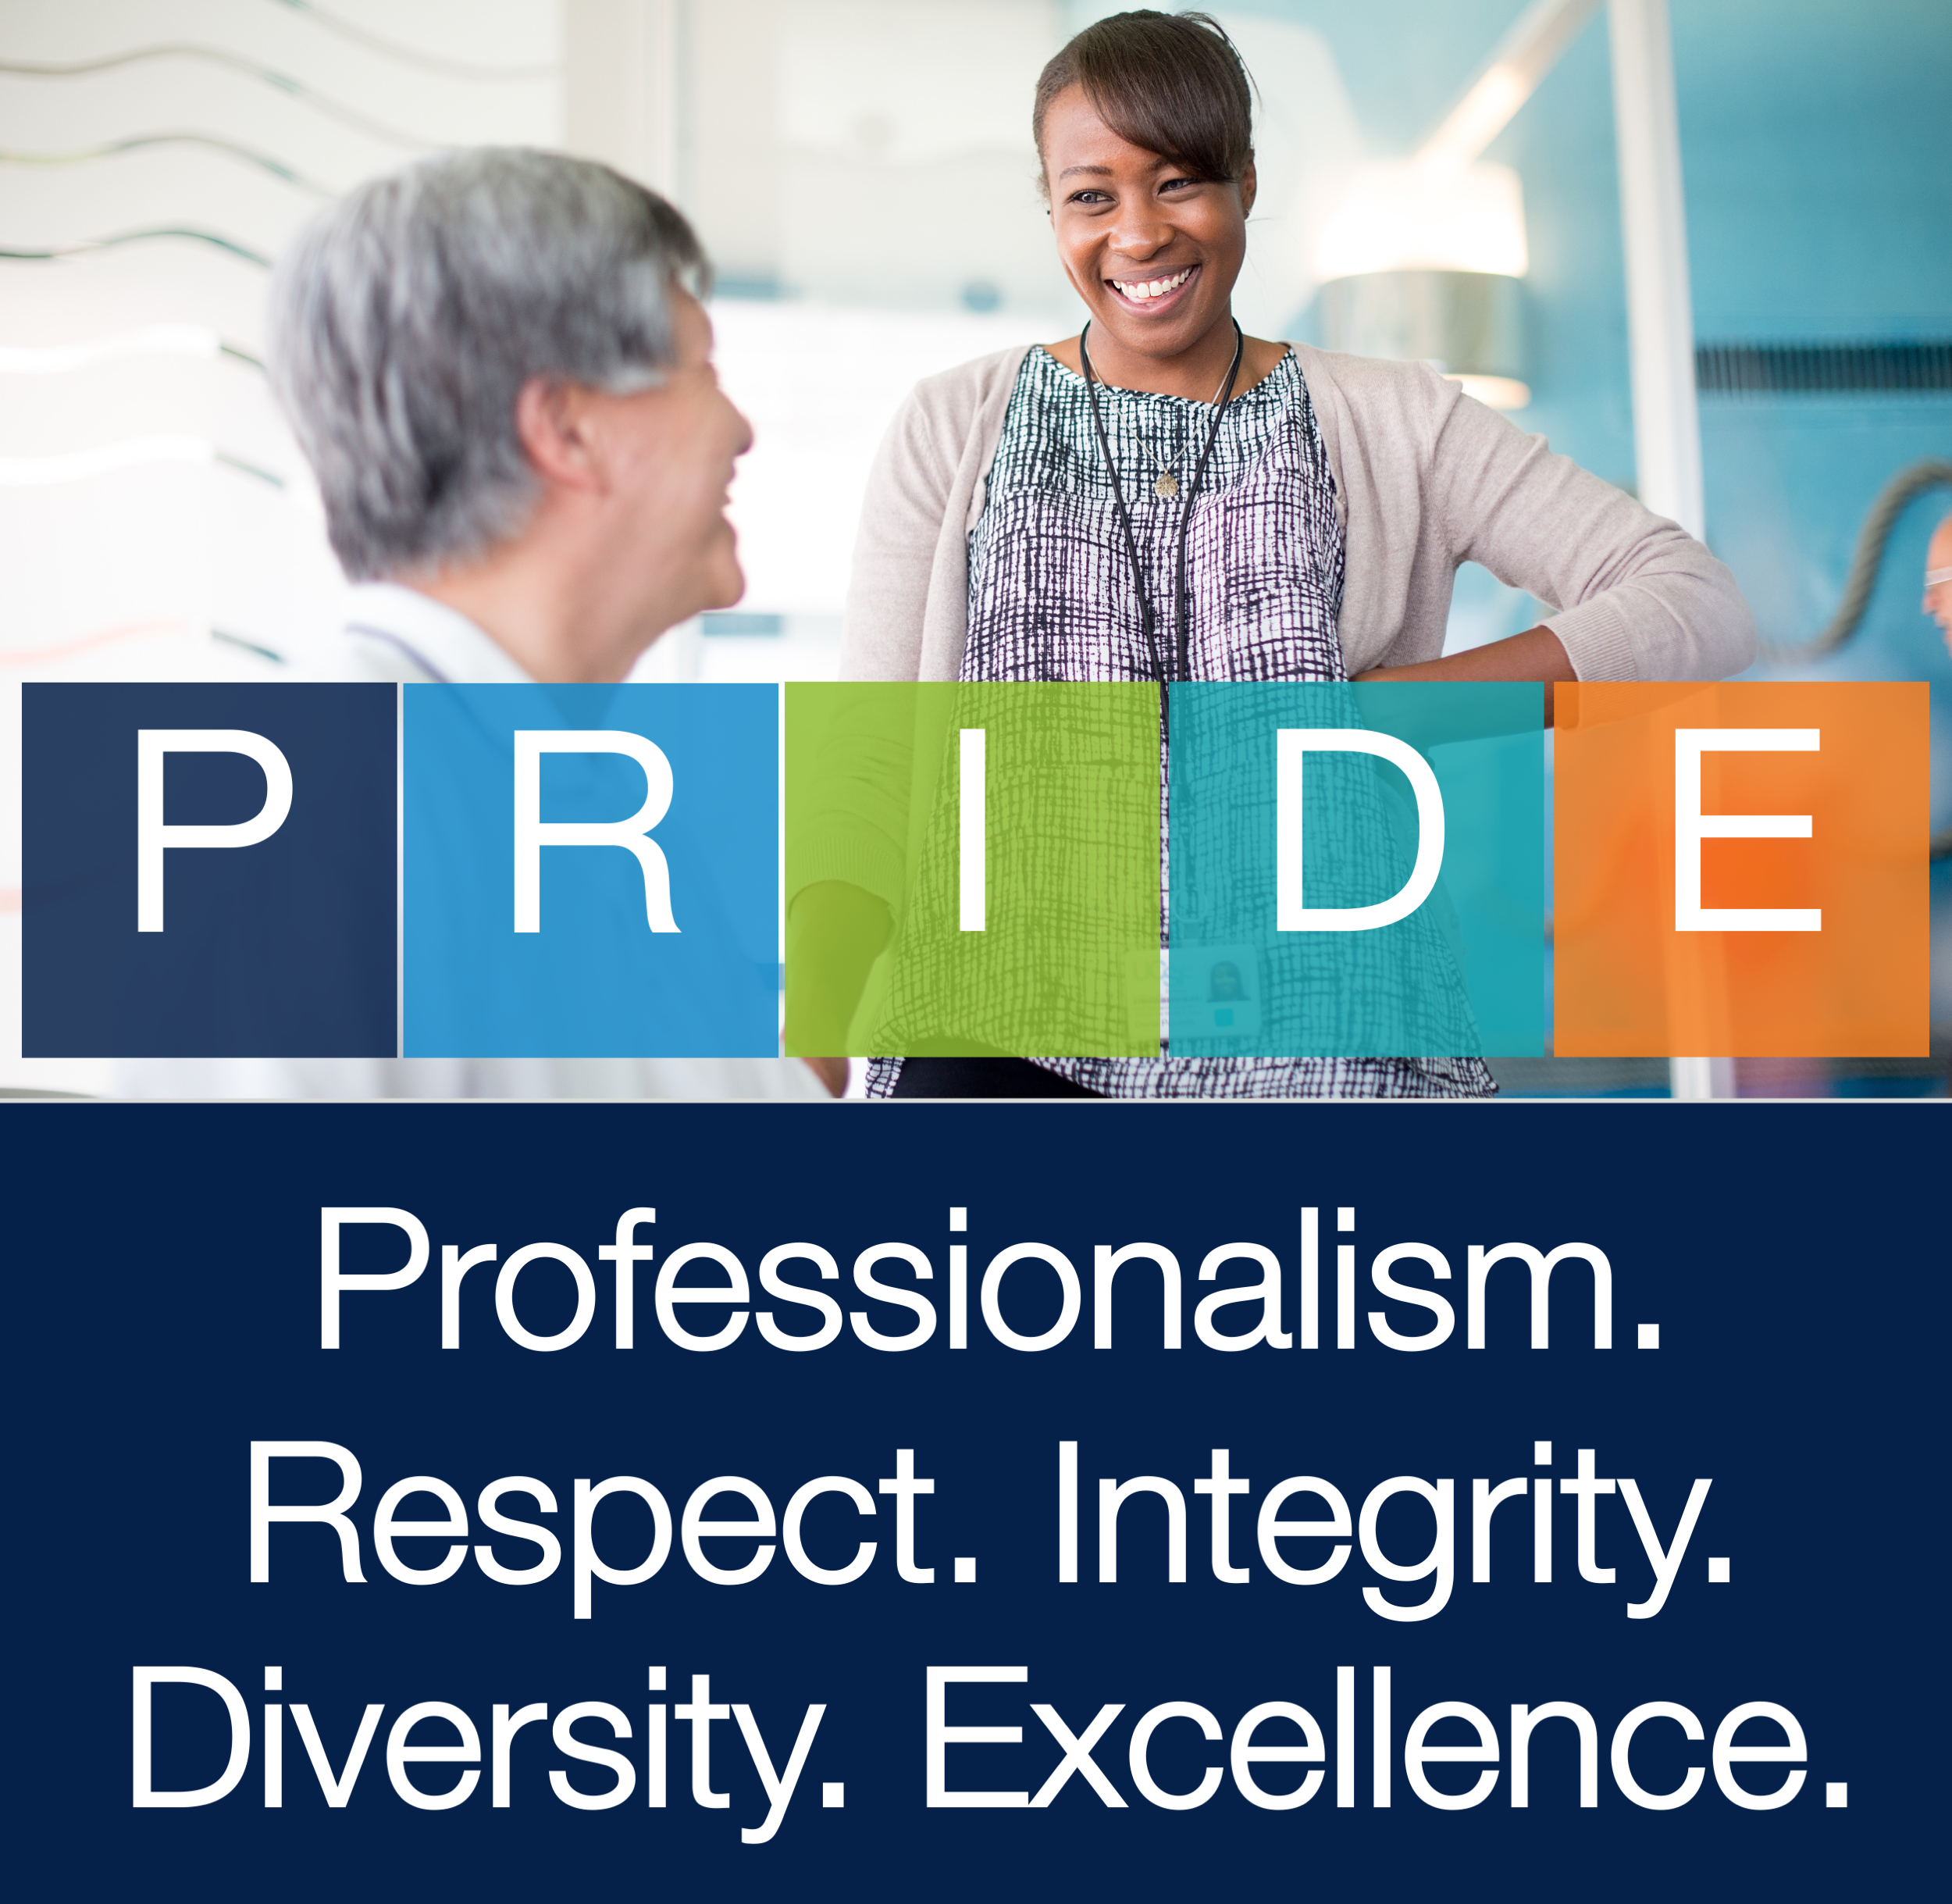 UCSF PRIDE values are Professionalism, Respect, Integrity, Diversity and Excellence.  Click the image to find out more.